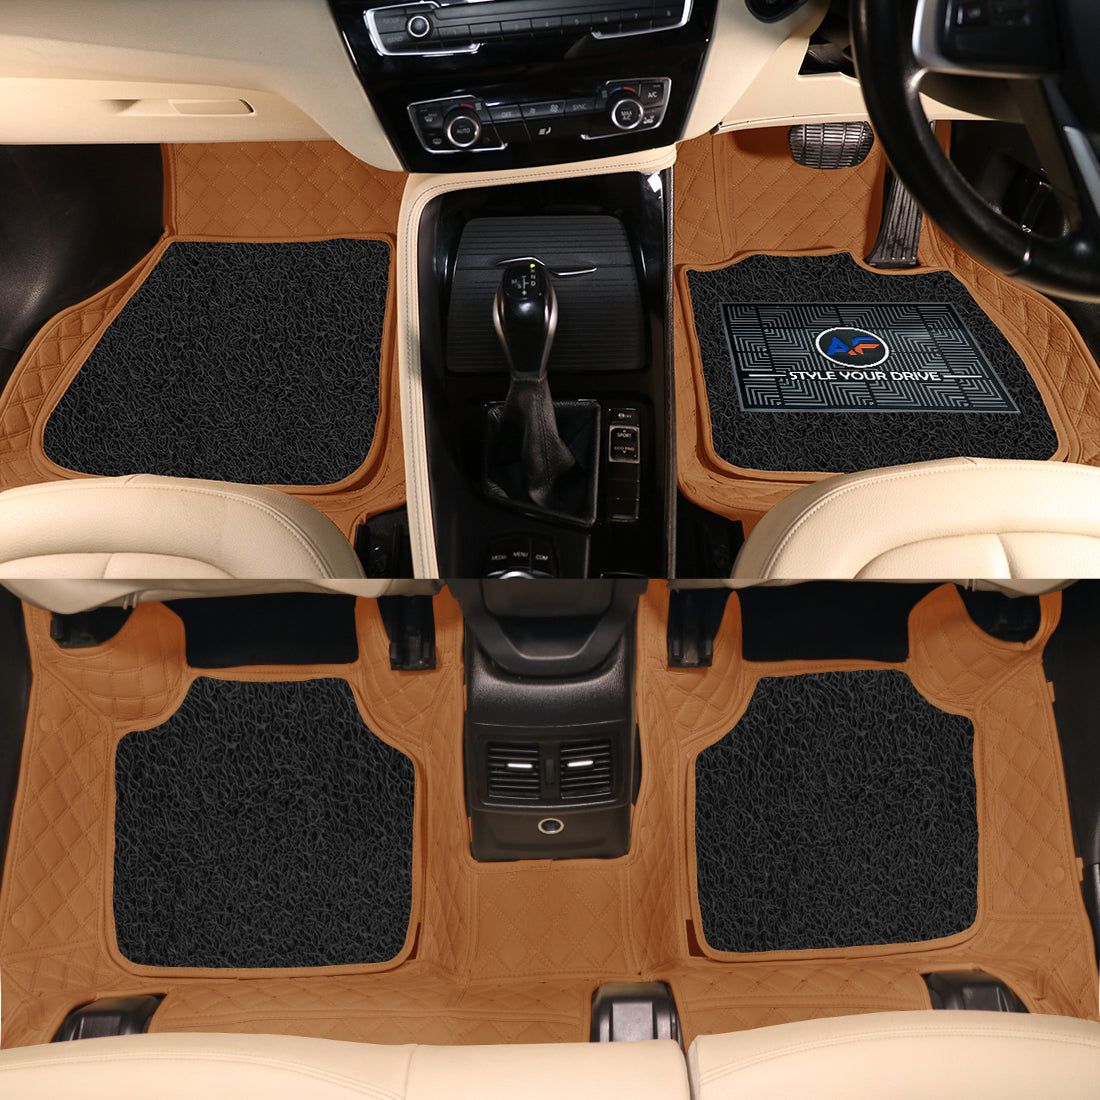 Hyundai i10 2010 7D Luxury Car Mat, All Weather Proof, Anti-Skid, 100% Waterproof & Odorless with Unique Diamond Fish Design (24mm Luxury PU Leather, 2 Rows)